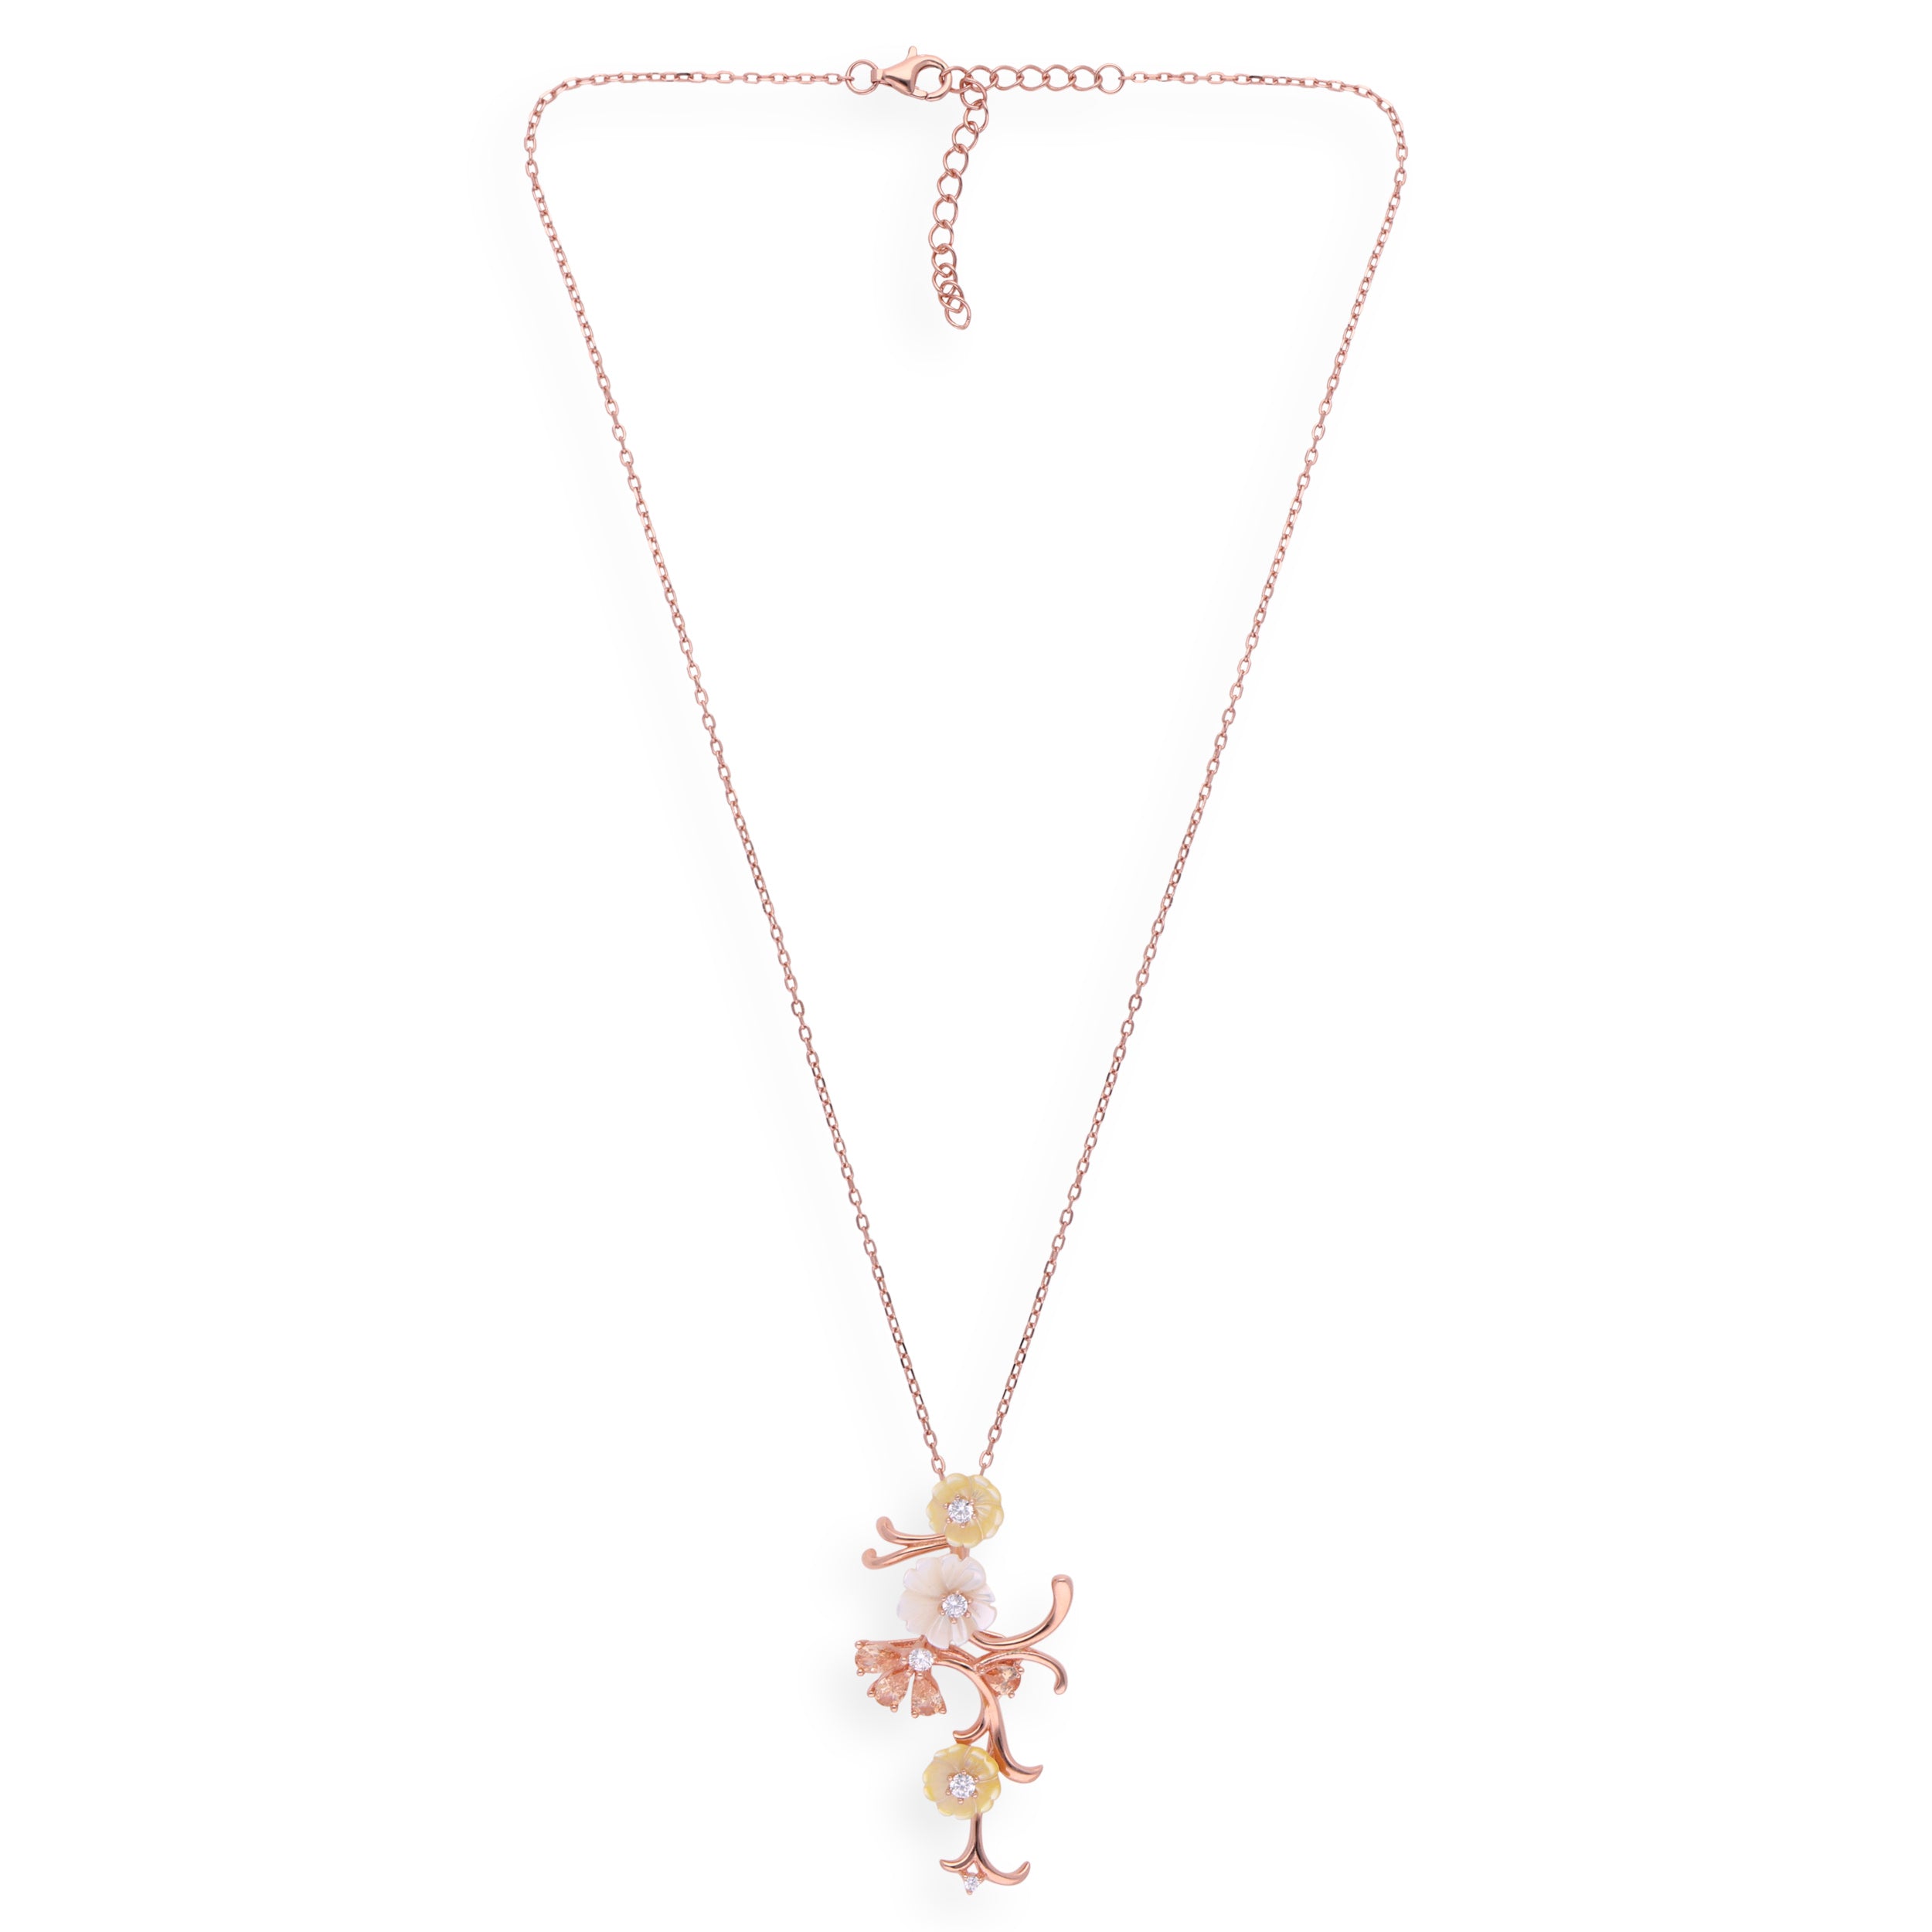 Radiant Rose: Fancy Sterling Silver Necklace Studded with Cubic Zirconia in Rose Gold | SKU : 0003110447